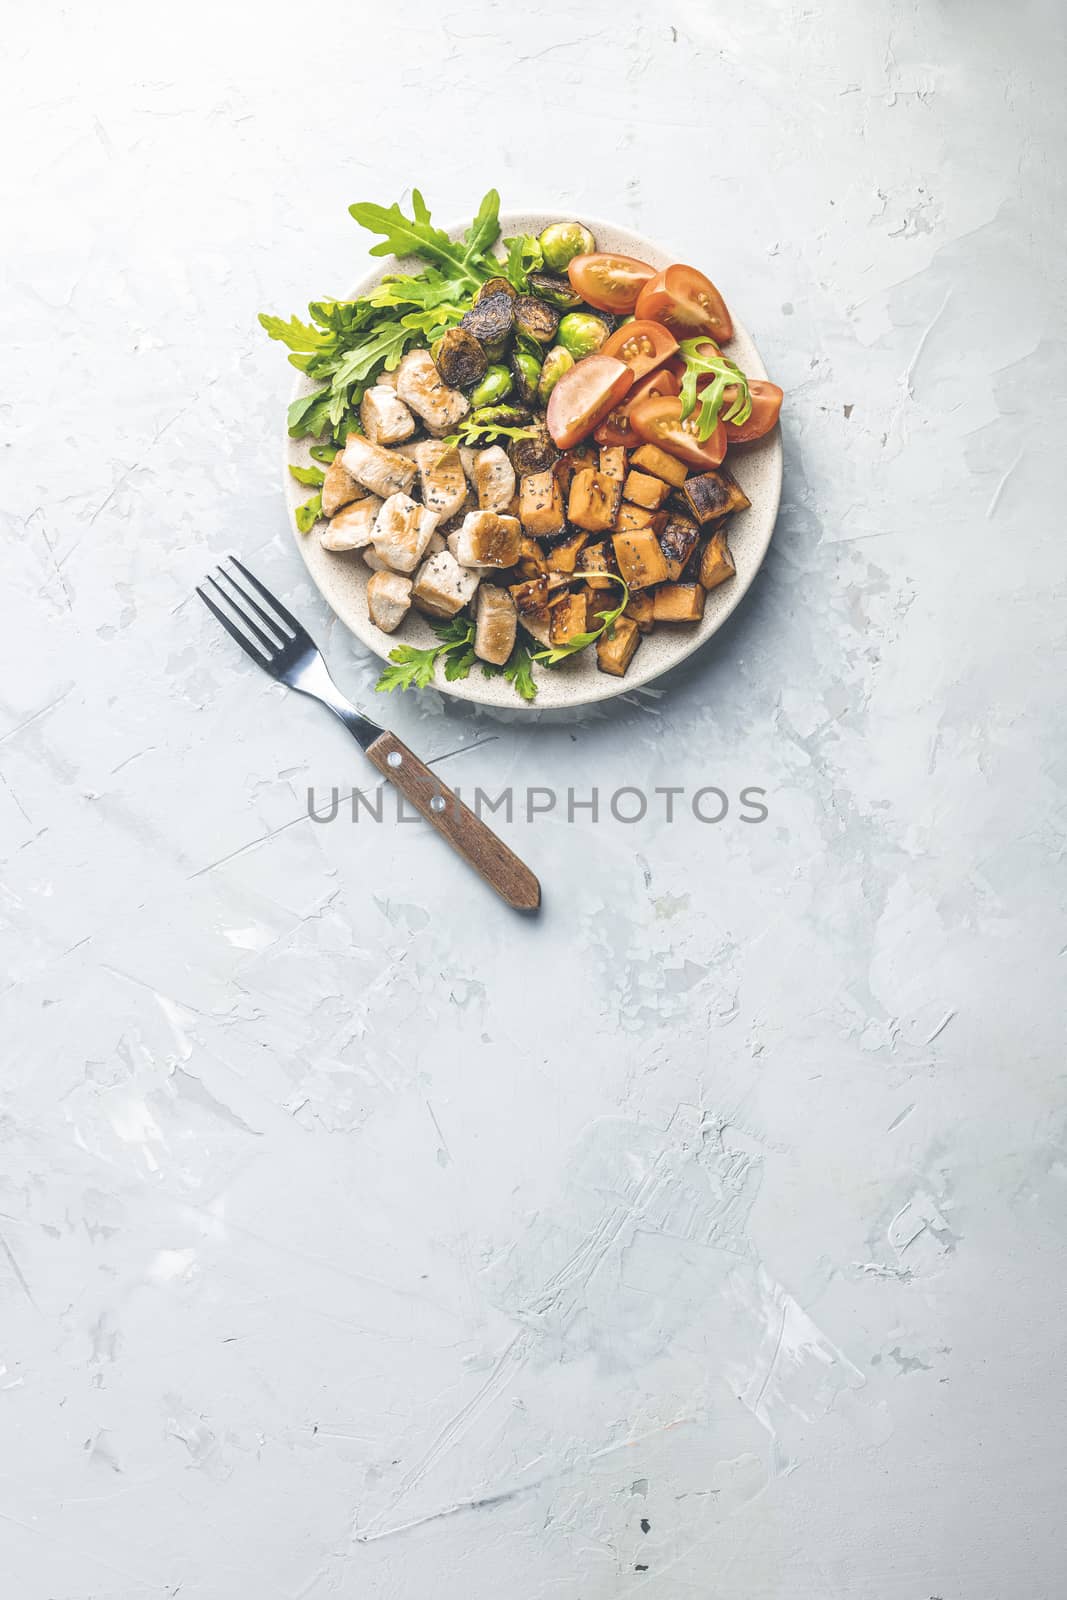 Healthy food. Plate of baking chicken meat, fried sweet potato and brussels sprouts. Top view, light gray concrete surface, flat lay.